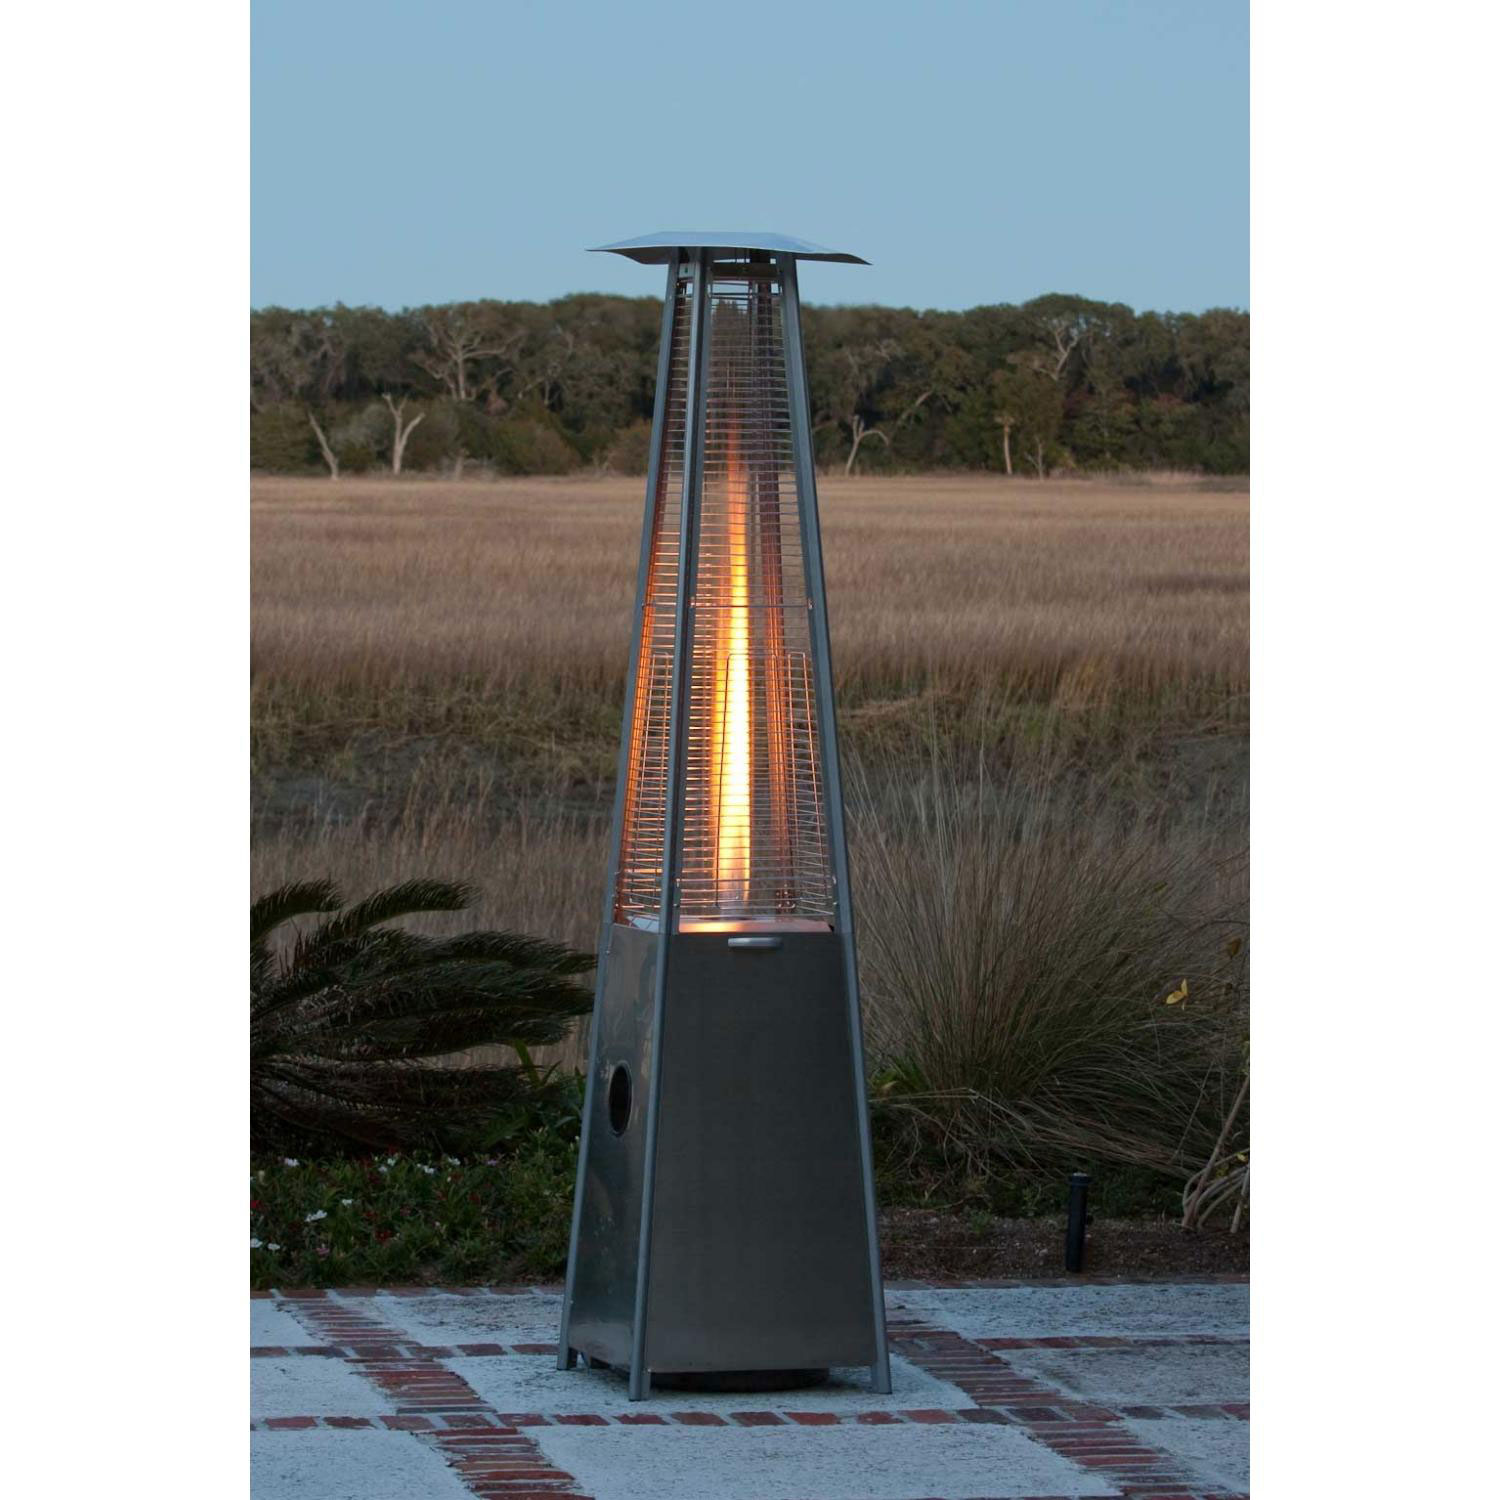 Heater – Portable Patio Flame Heater